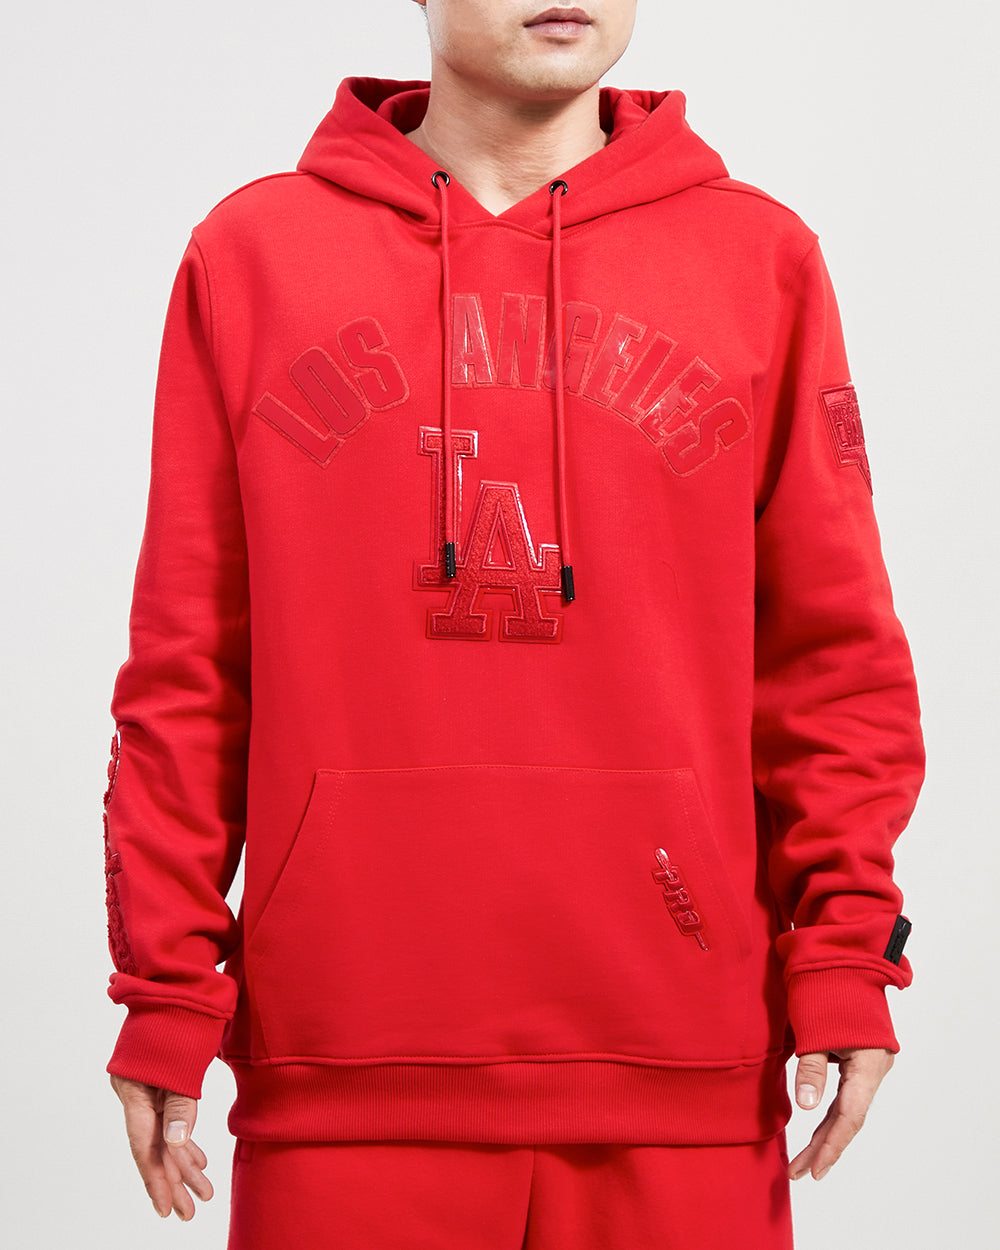 LOS ANGELES DODGERS CLASSIC TRIPLE RED FLC PO HOODIE (TRIPLE RED)